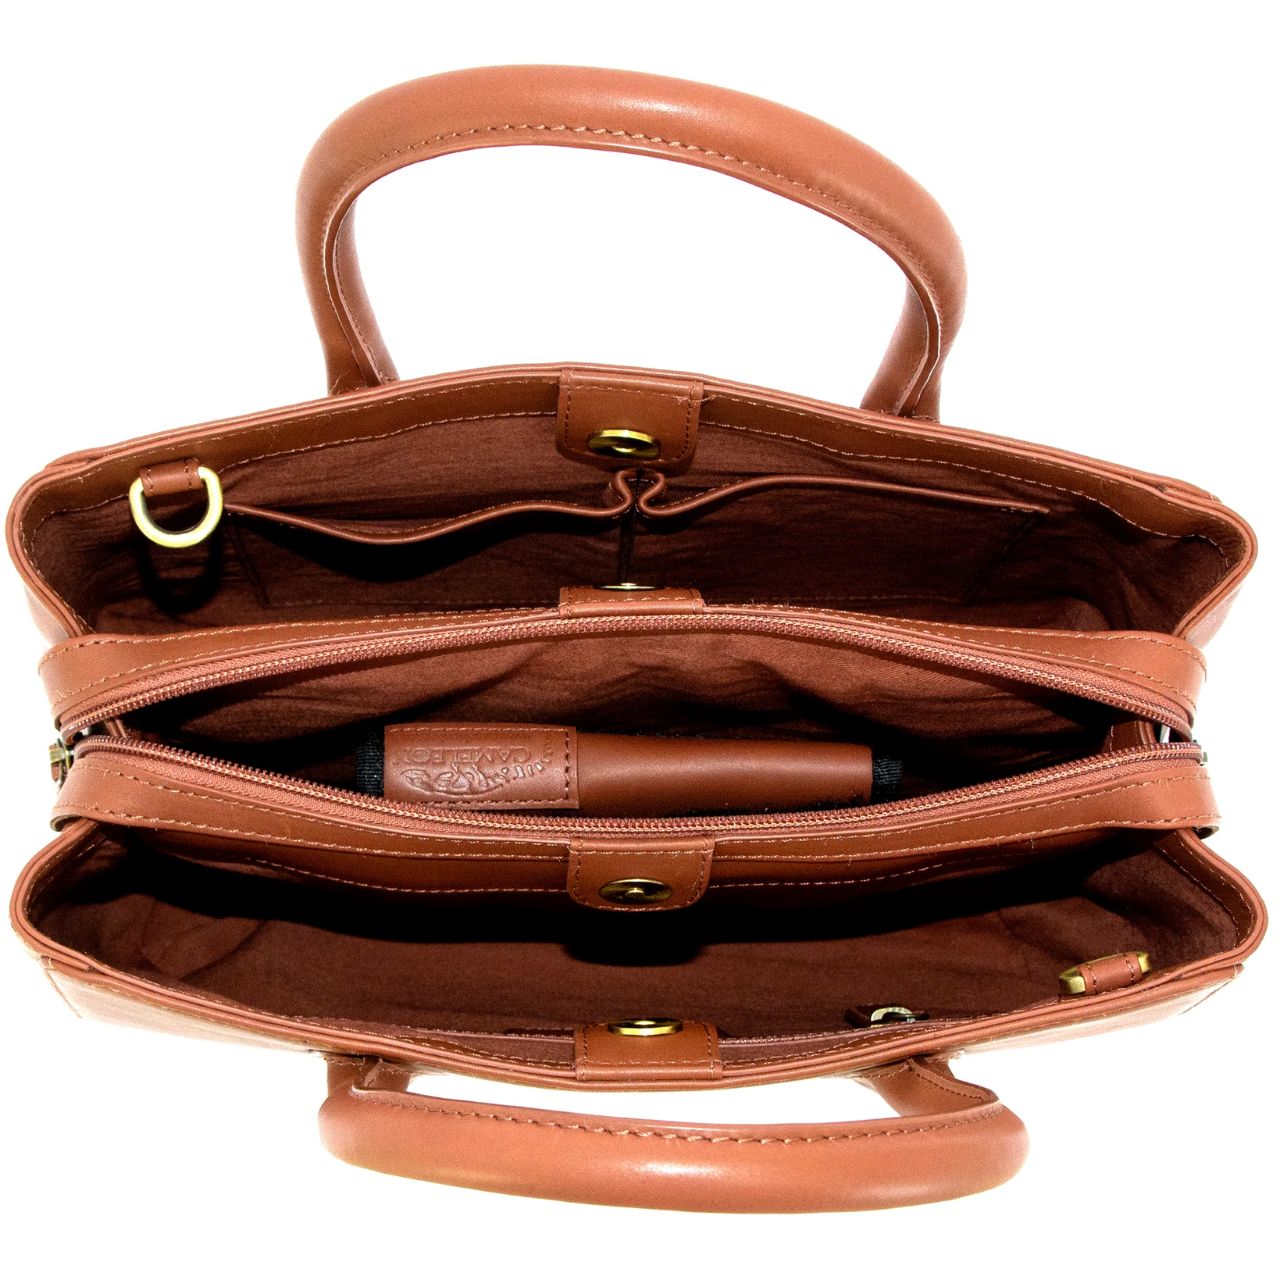 Interior of Brown concealed carry purse